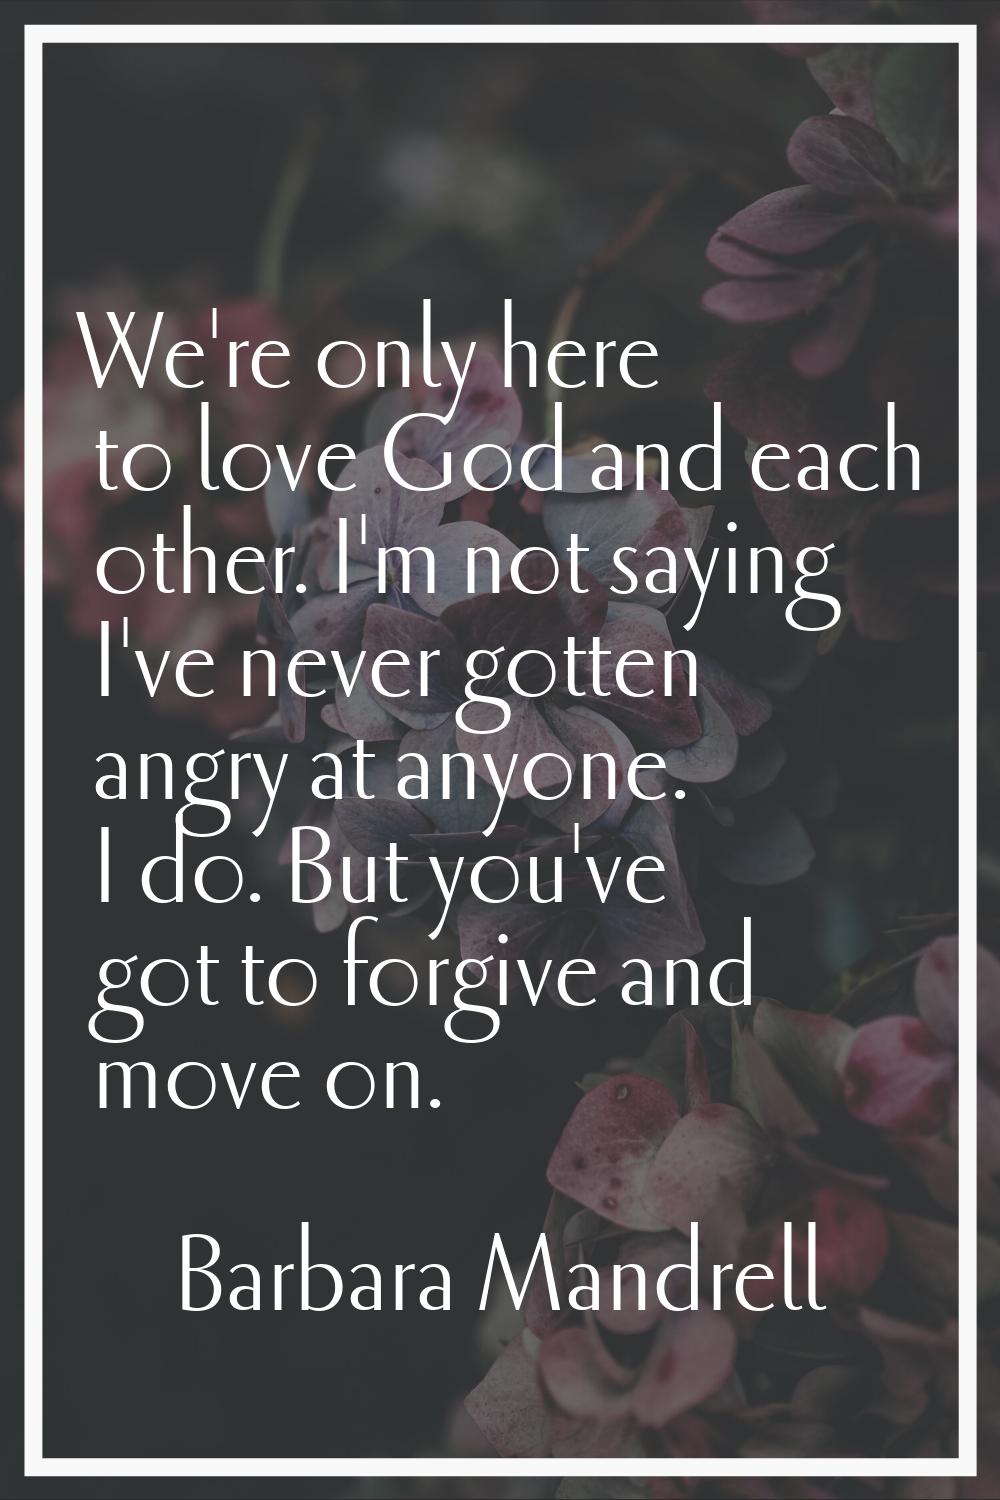 We're only here to love God and each other. I'm not saying I've never gotten angry at anyone. I do.